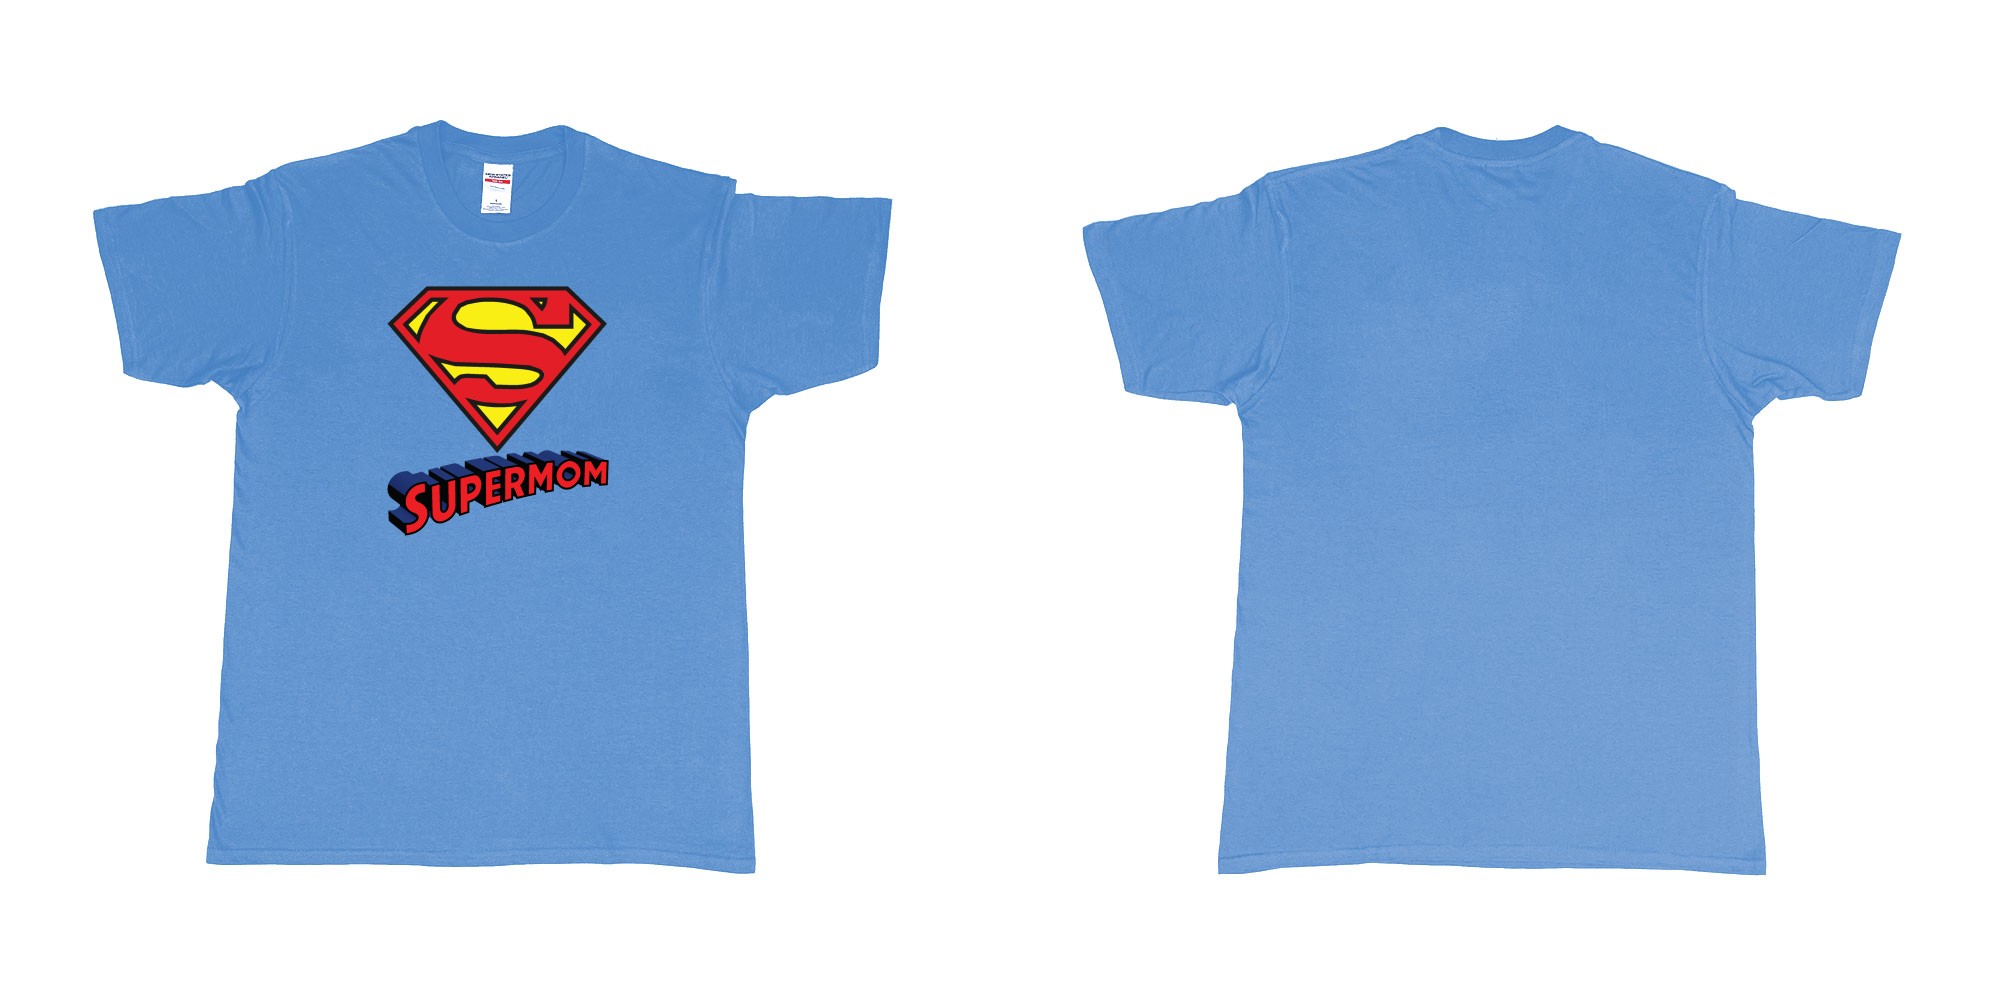 Custom tshirt design superman logo with own custom text print bali in fabric color carolina-blue choice your own text made in Bali by The Pirate Way